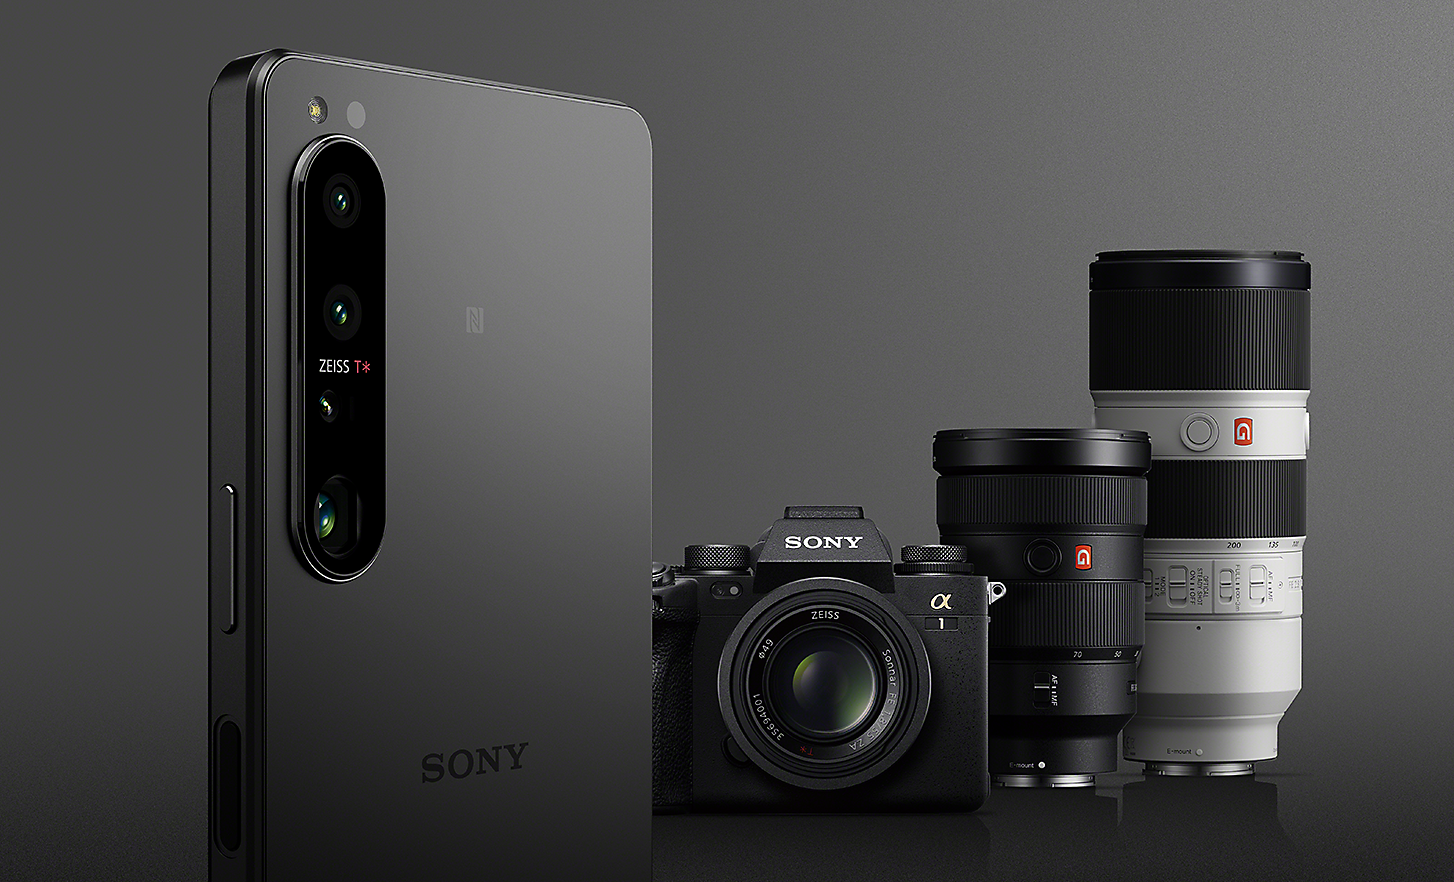 Xperia 1 IV smartphone with Sony Alpha camera and lenses in the background